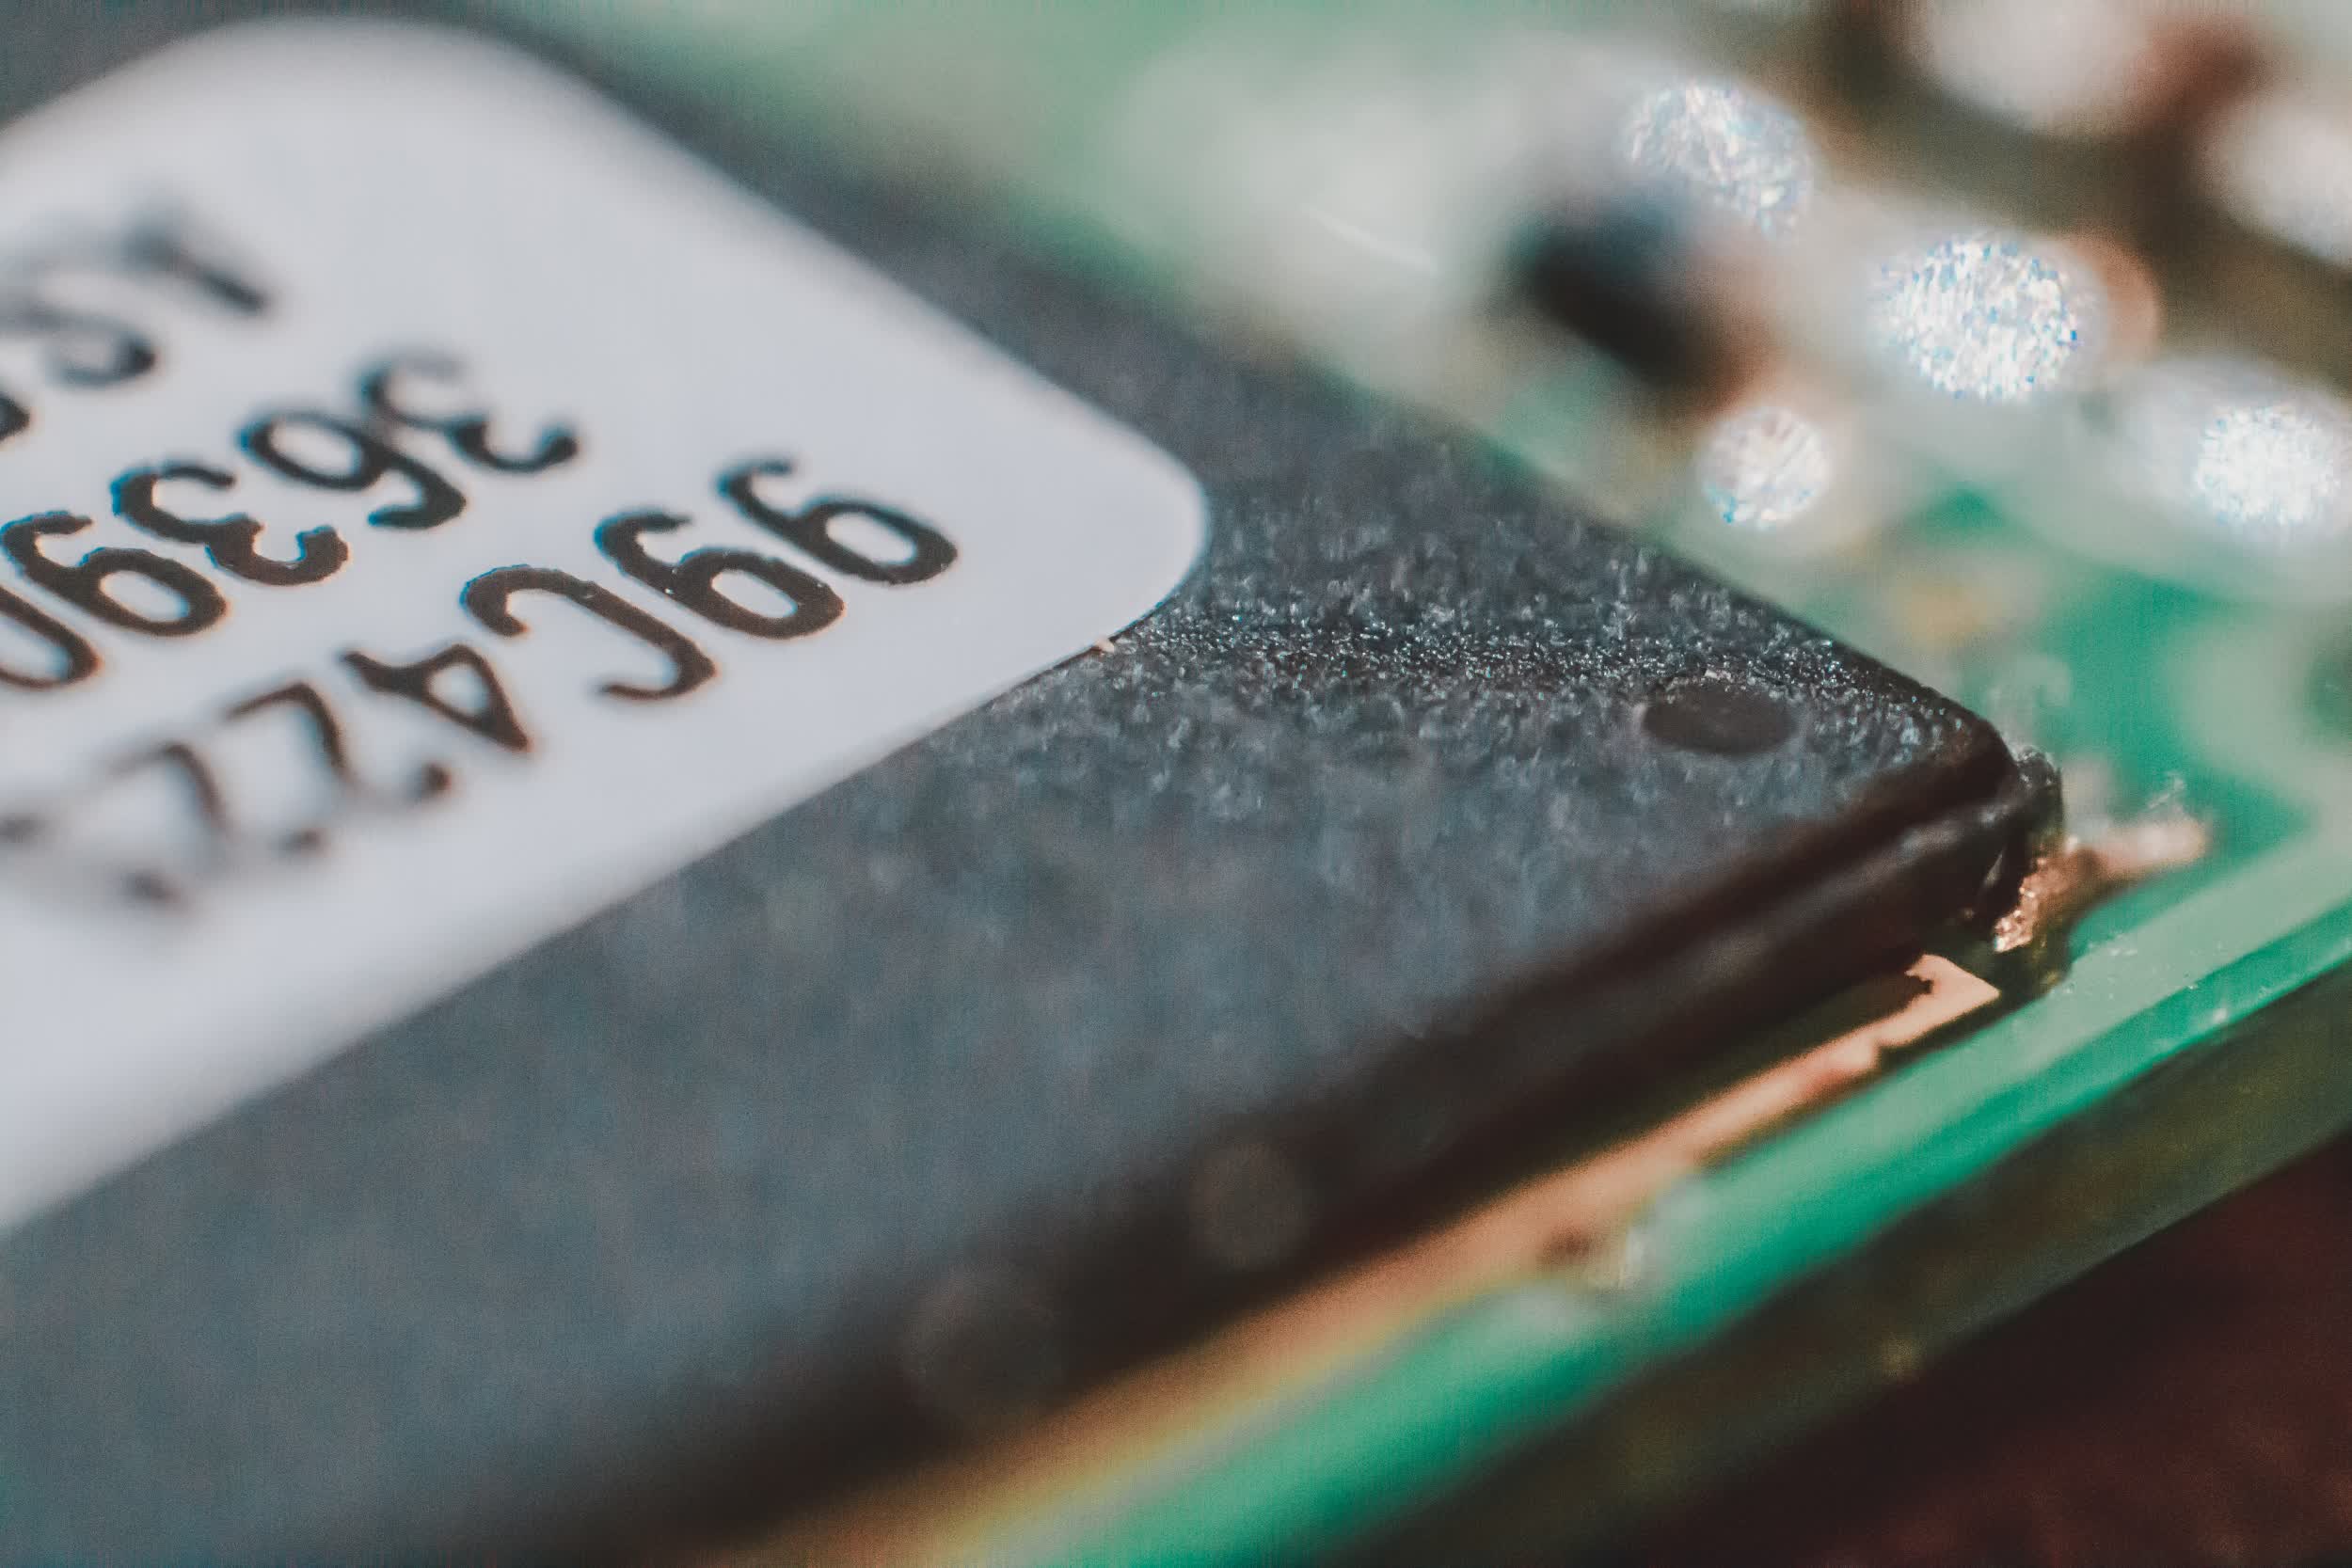 Expect SSD and RAM prices to rise as memory manufacturers slash production